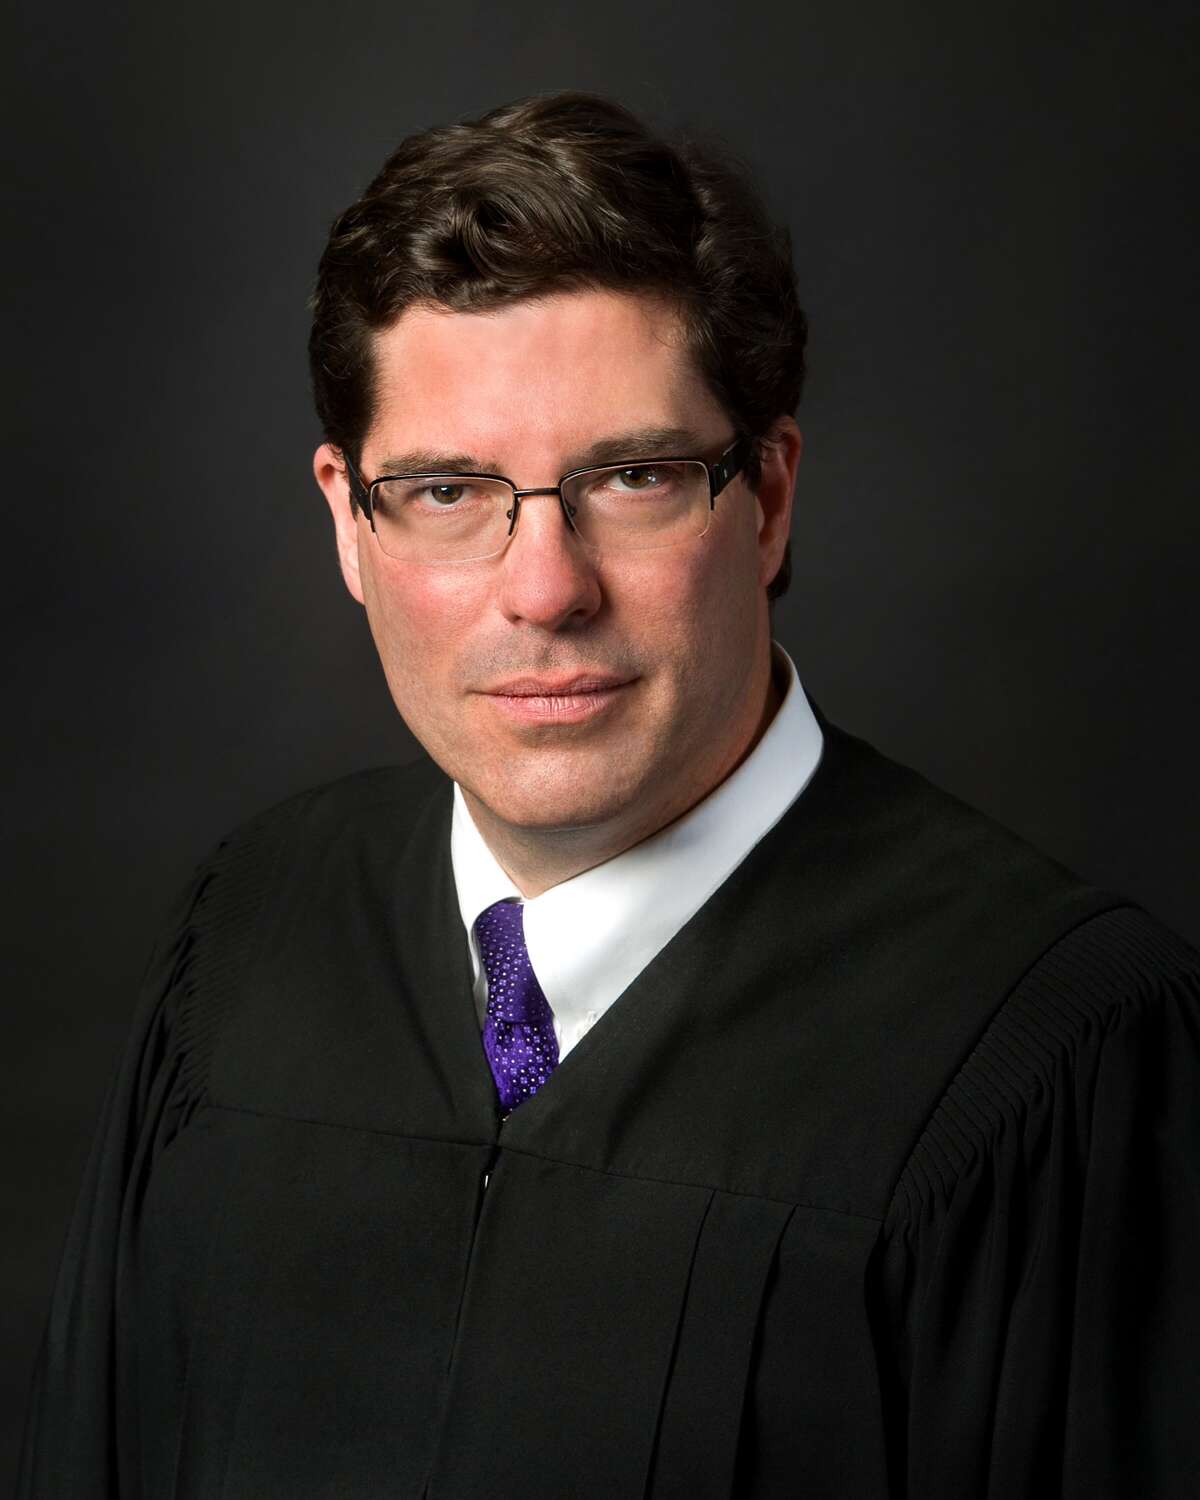 Troy City Court Judge Chris Maier will soon lead the region's first opioid court, a special court aimed at getting immediately treatment to non-violent addicts.